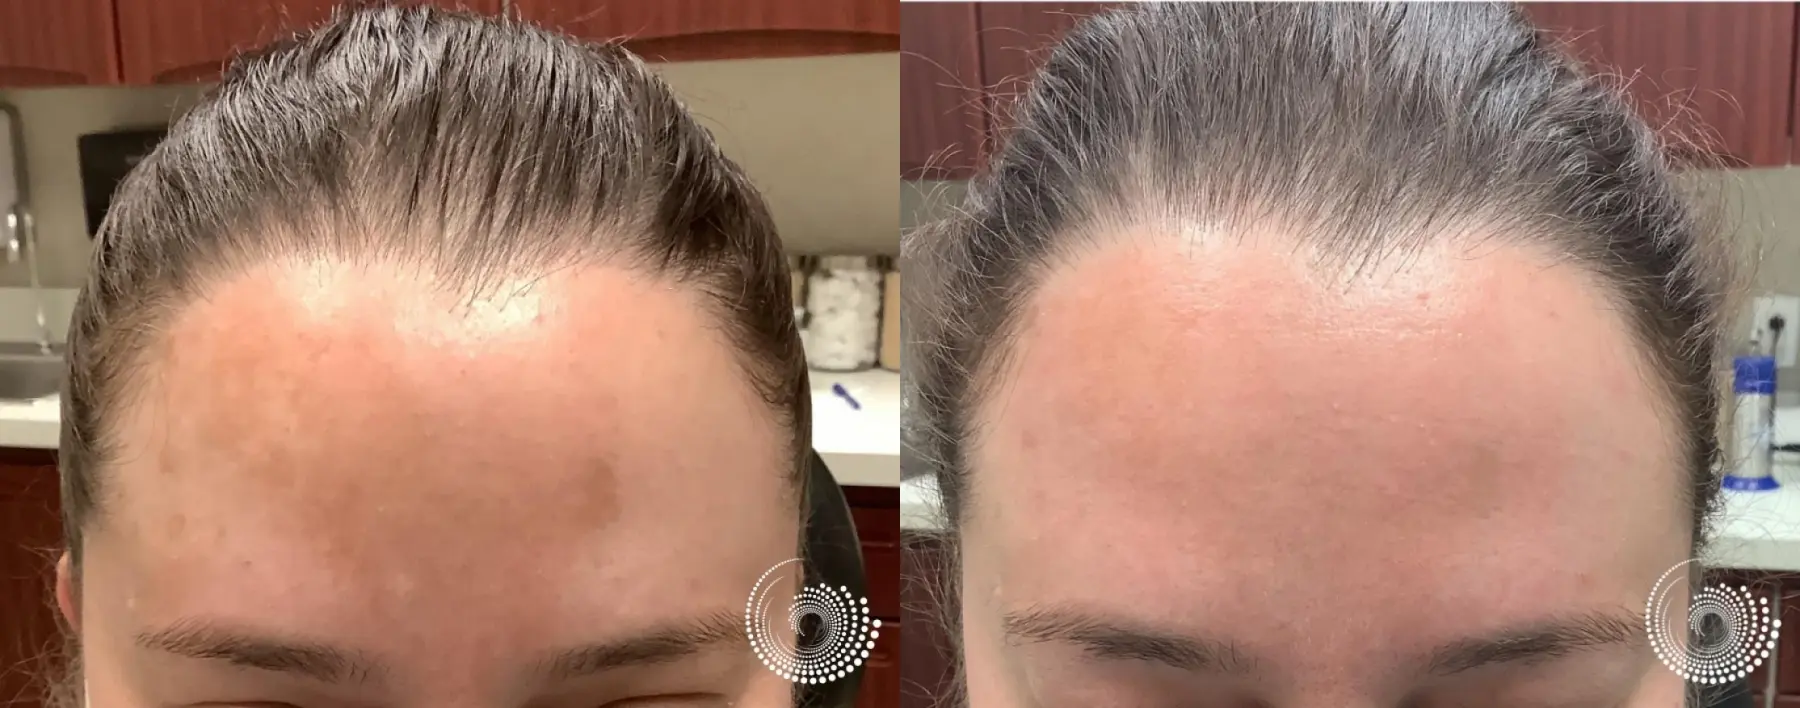 Melasma: Patient 1 - Before and After 1